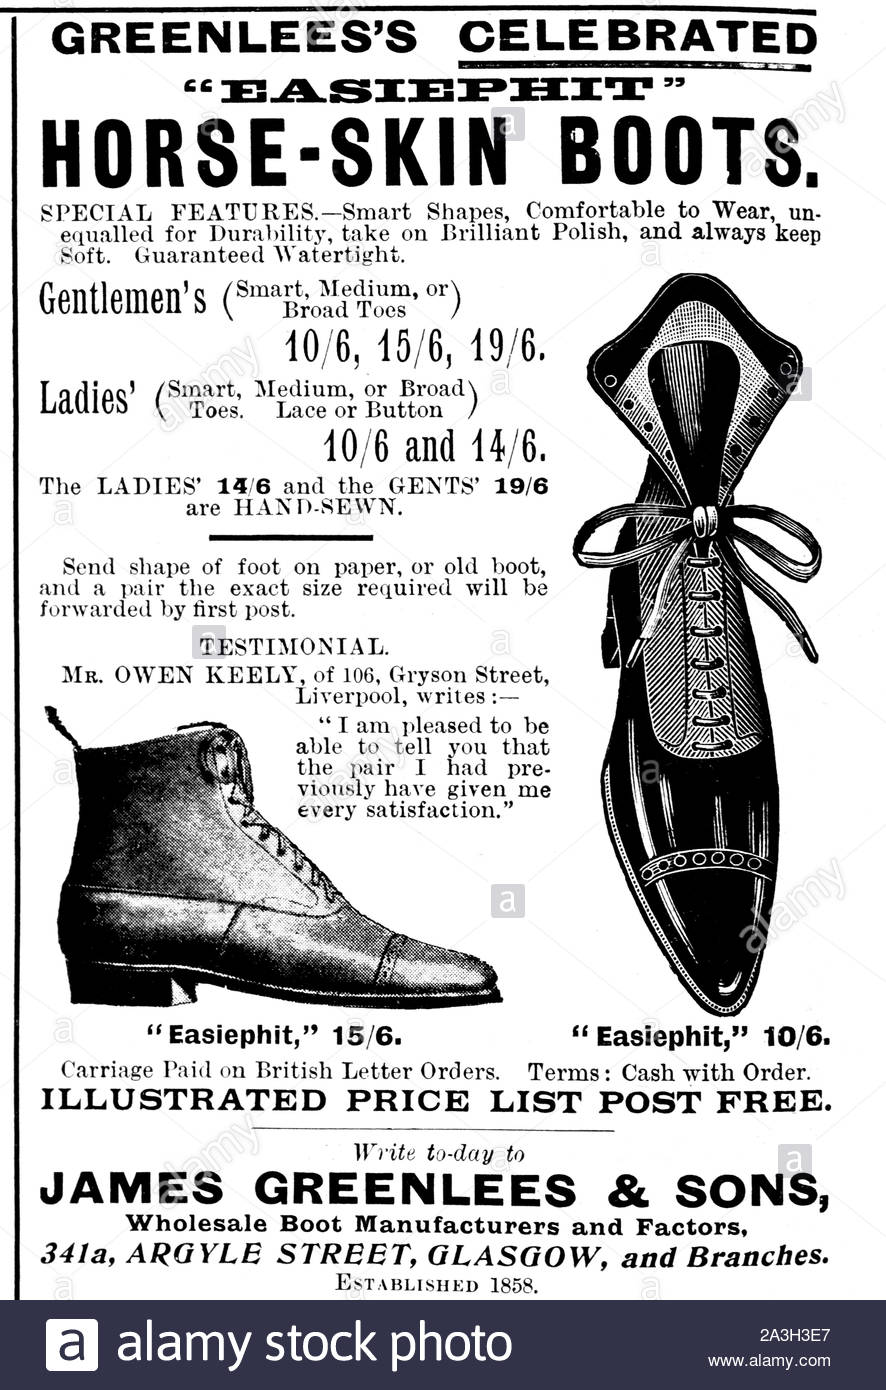 Victorian era, Easiephit Horse-Skin Boots, vintage advertising from 1899 Stock Photo